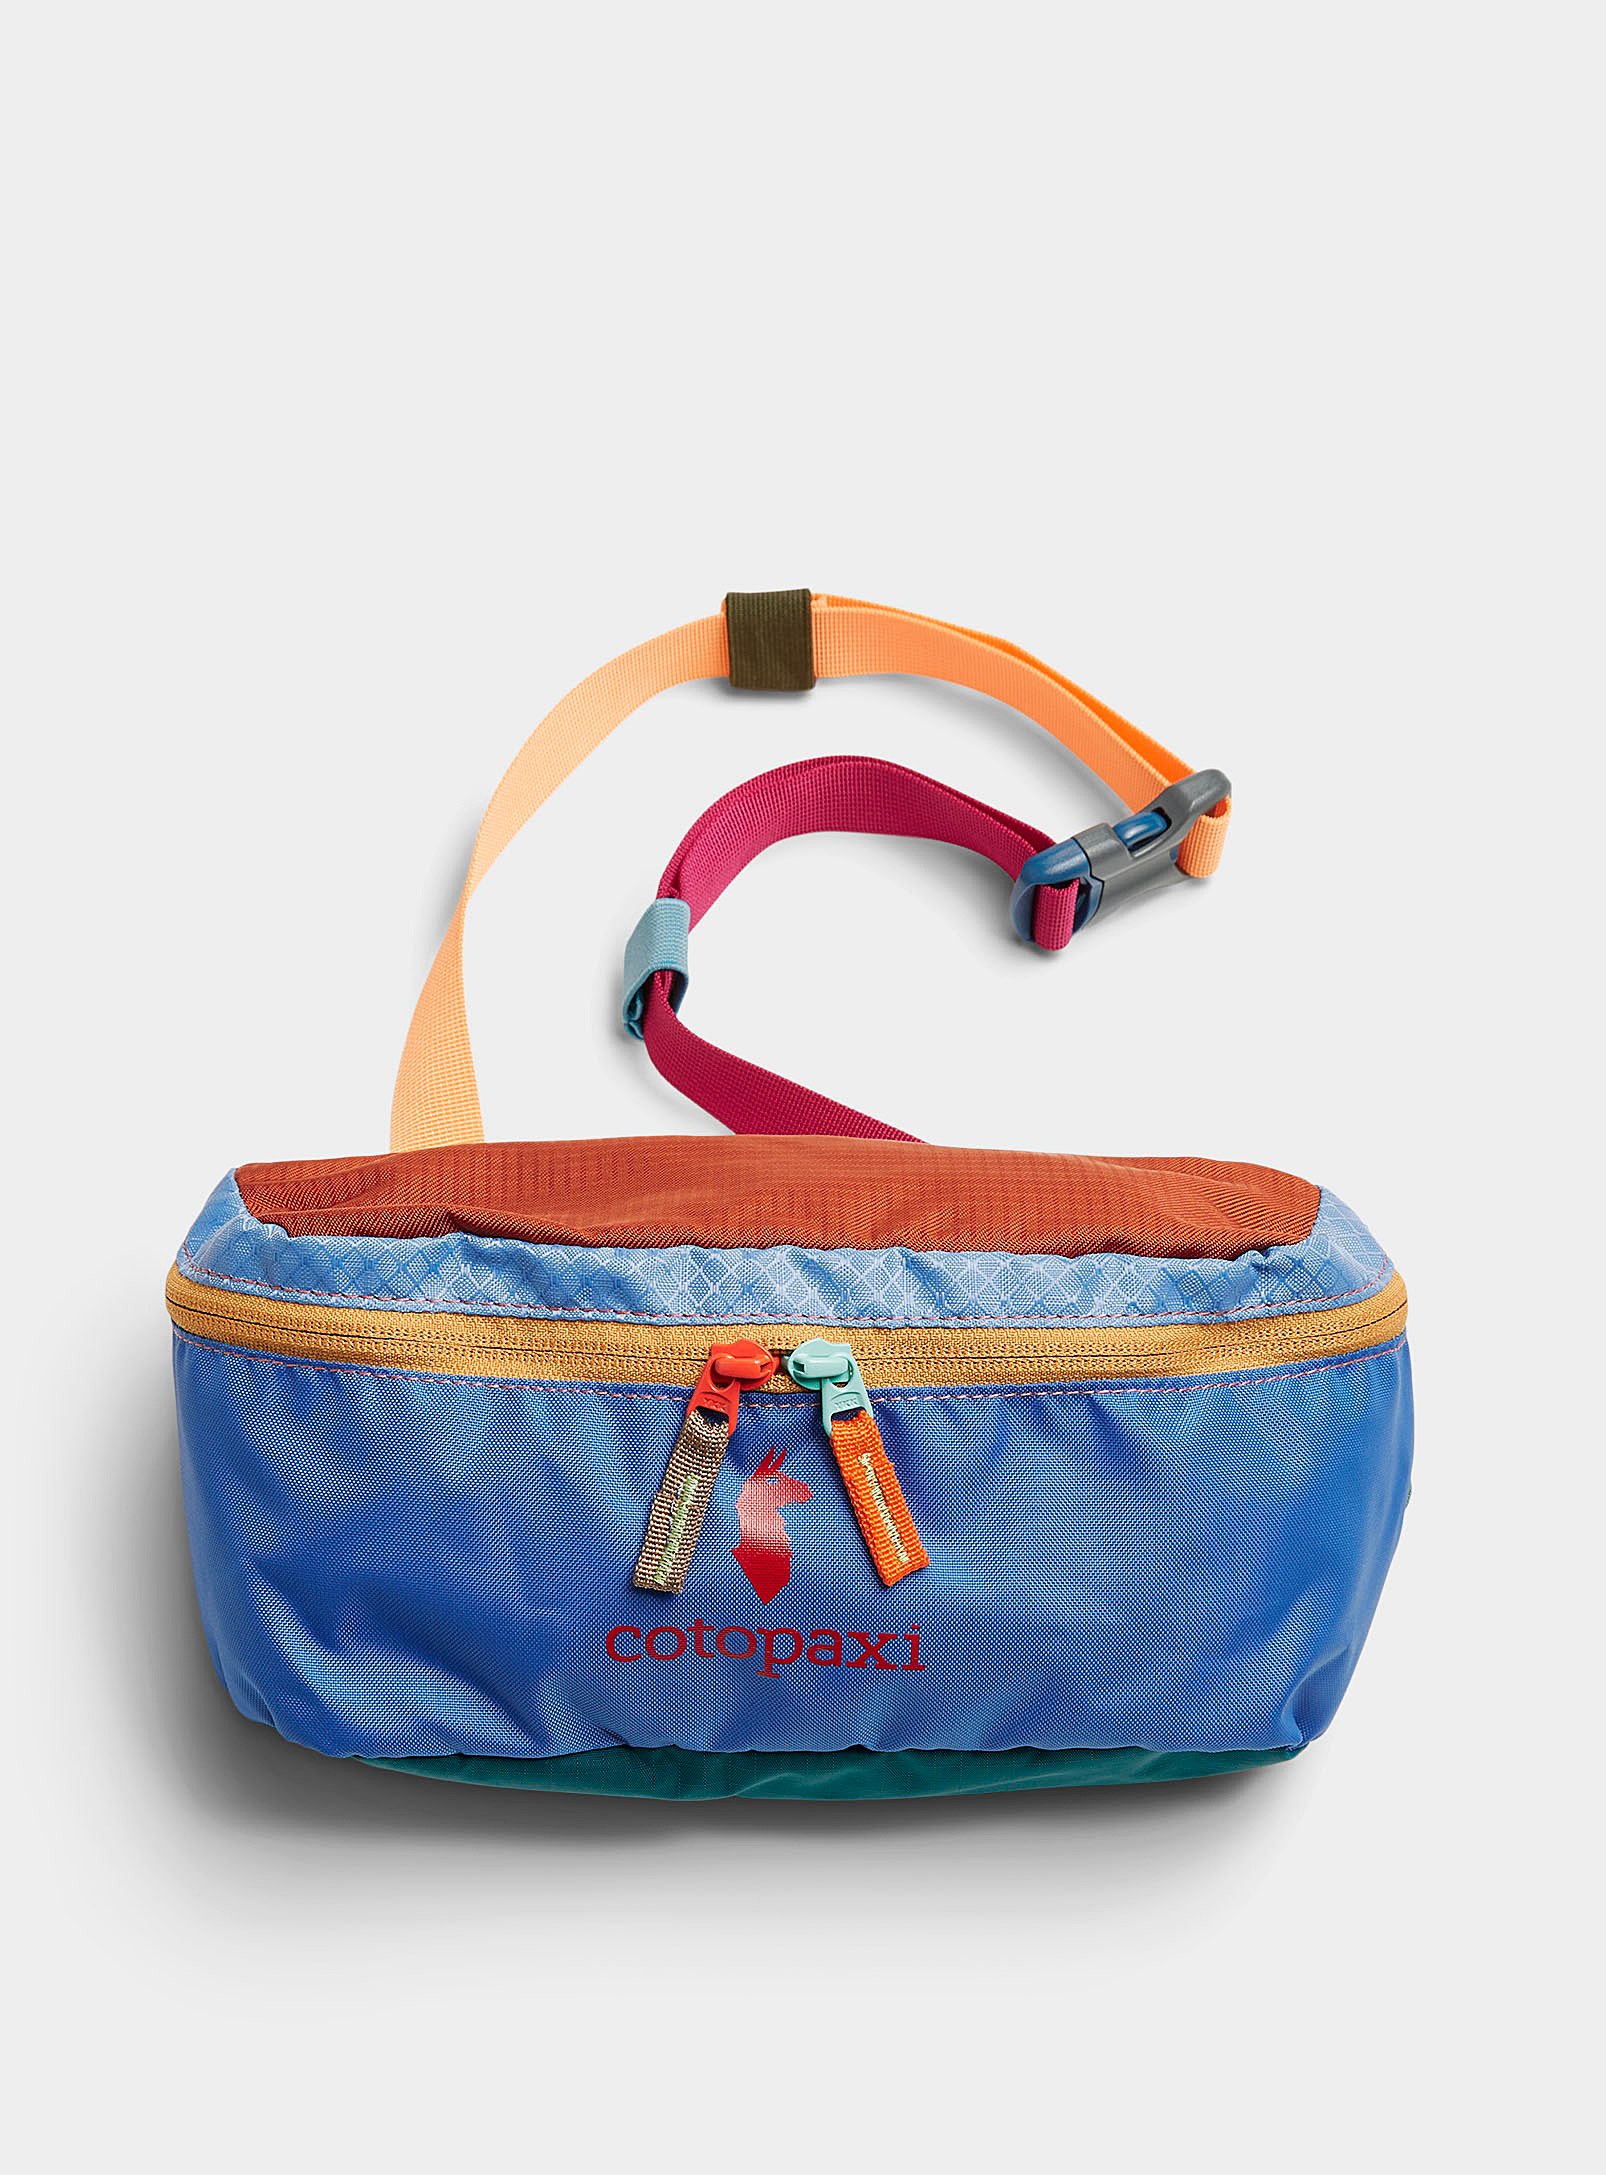 Cotopaxi - Men's Bataan 3L fanny pack One-of-a-kind colourways from the Del Da collection